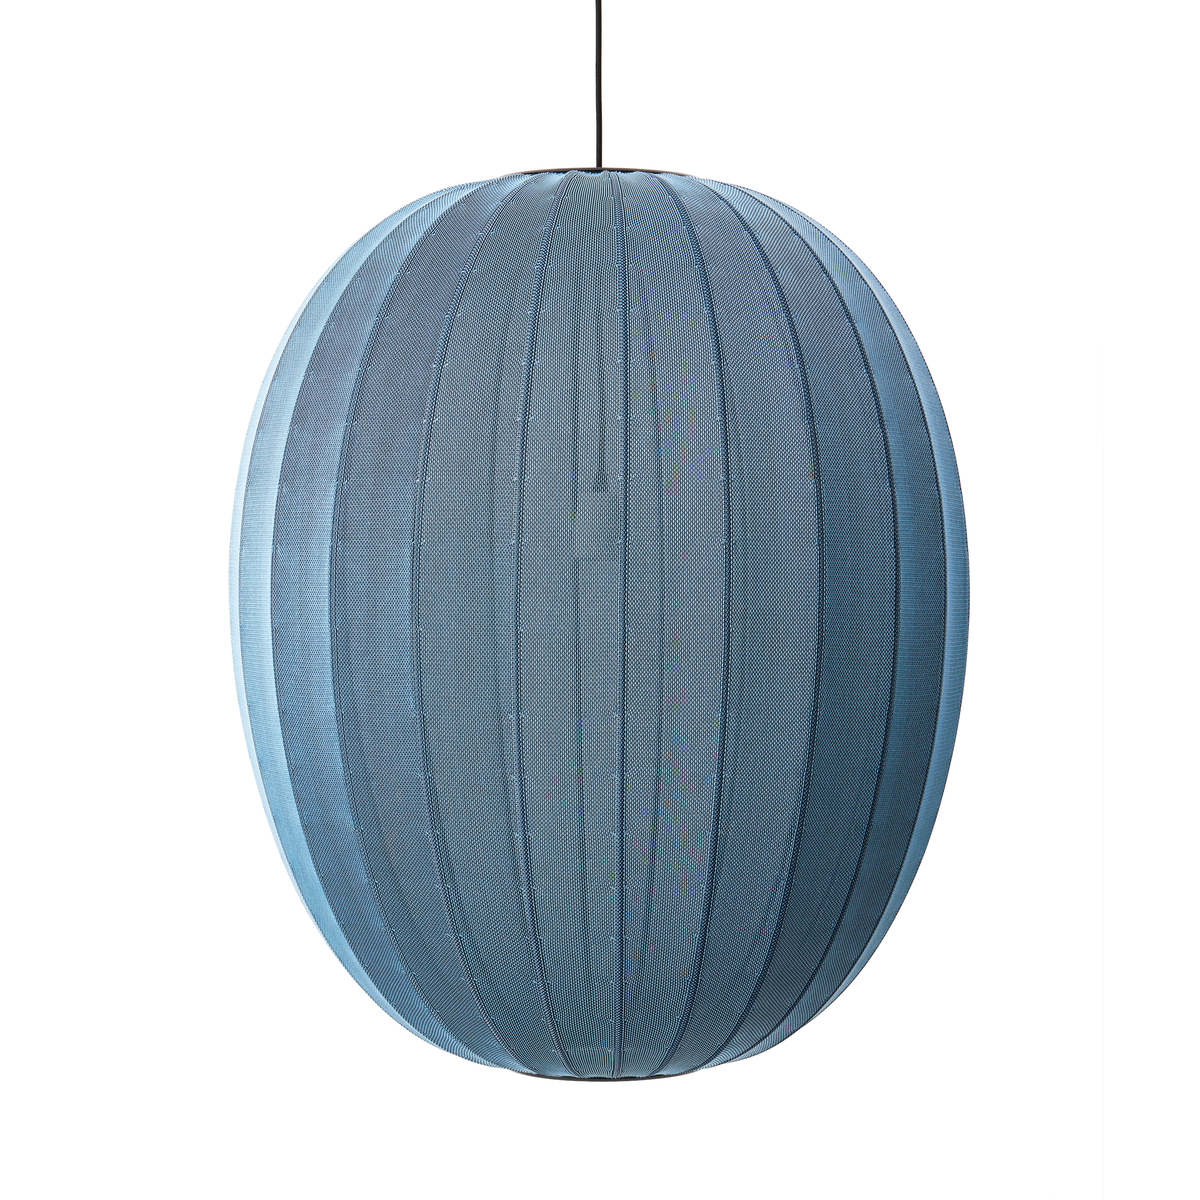 Made by Hand, Knit-Wit Pendant Lamp 65, Blue Stone, Pendant,